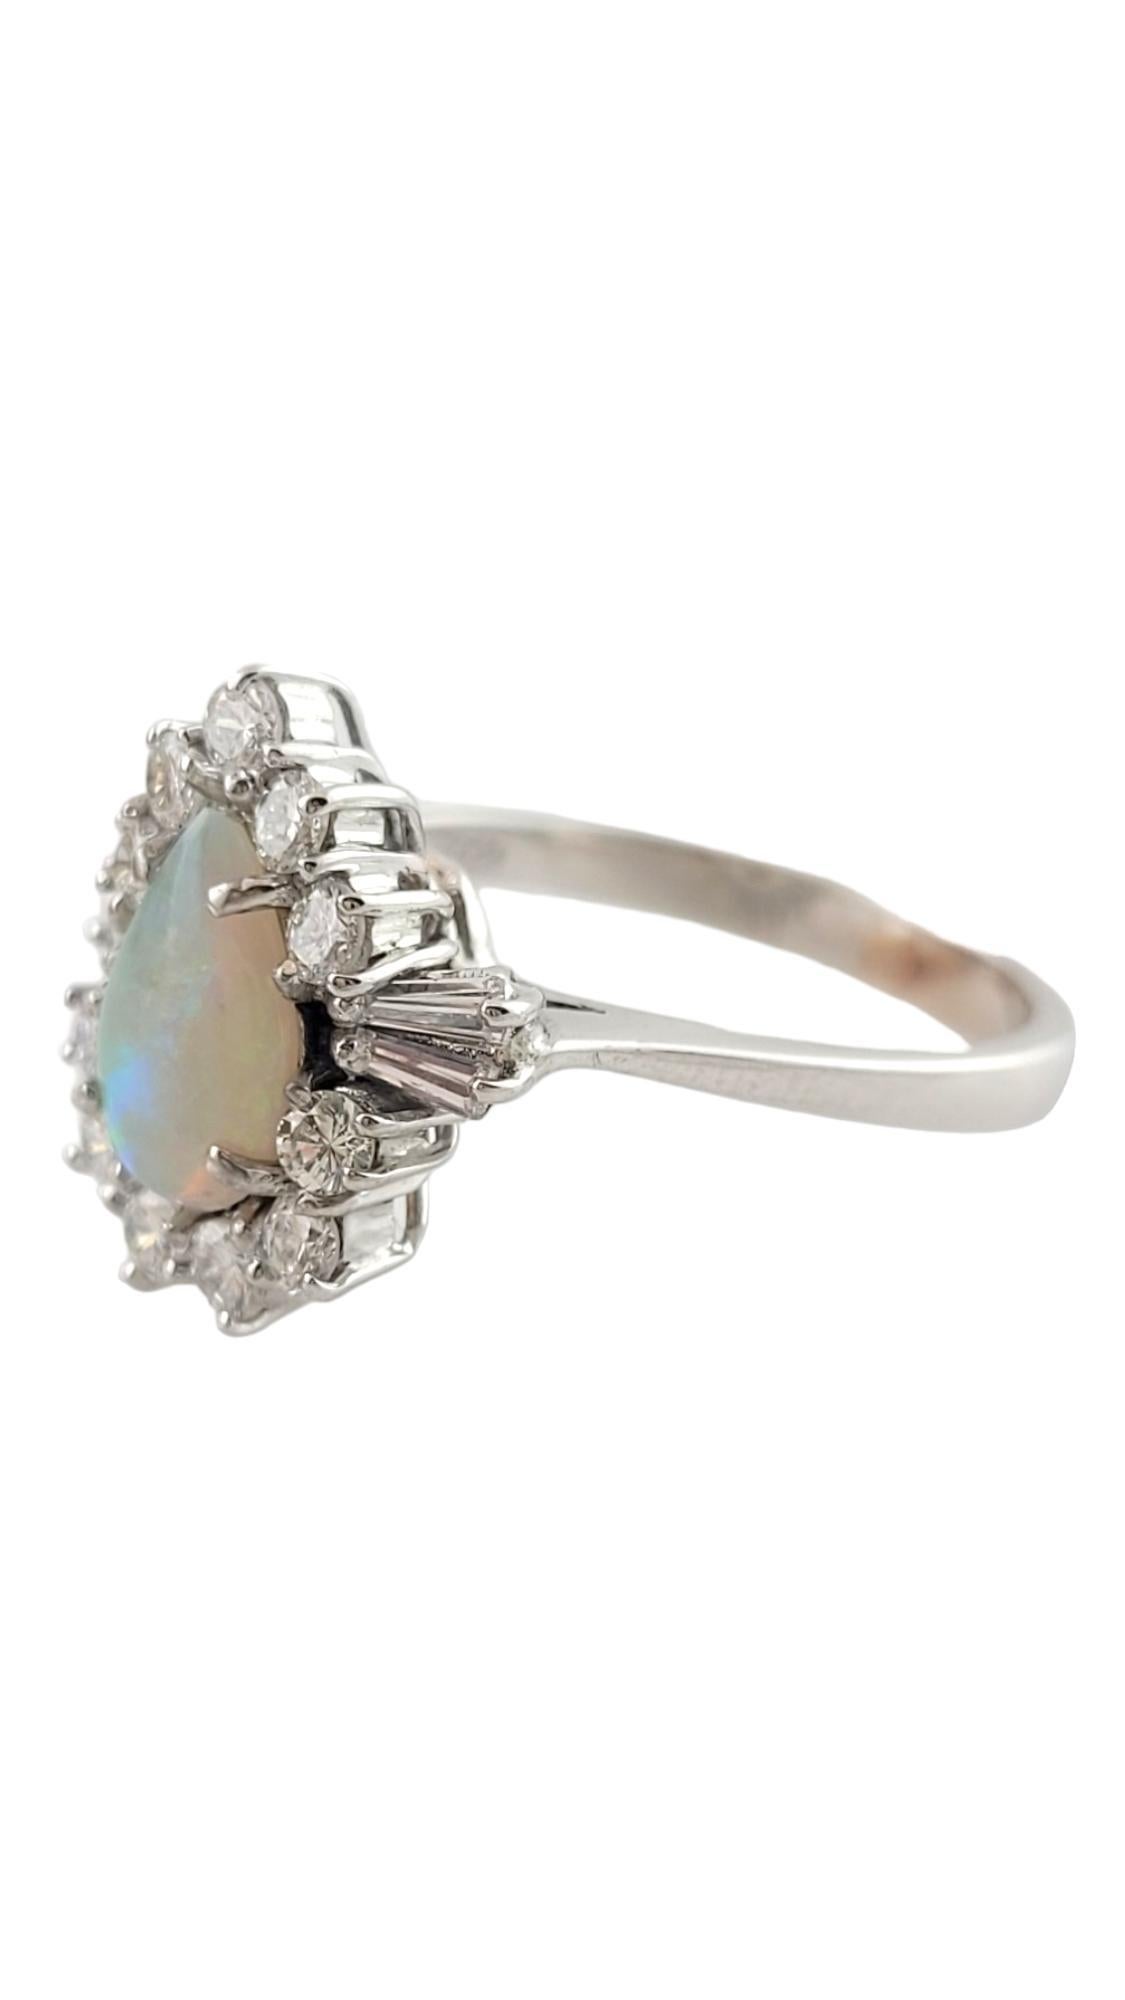 Vintage 14K White Gold Opal Diamond Ring size 7.25

This gorgeous 14K white gold ring features a breathtaking pear shaped opal stone in the center, surrounded by 11 round brilliant cut diamonds and 4 beautiful baguette cut diamonds!

Approximate